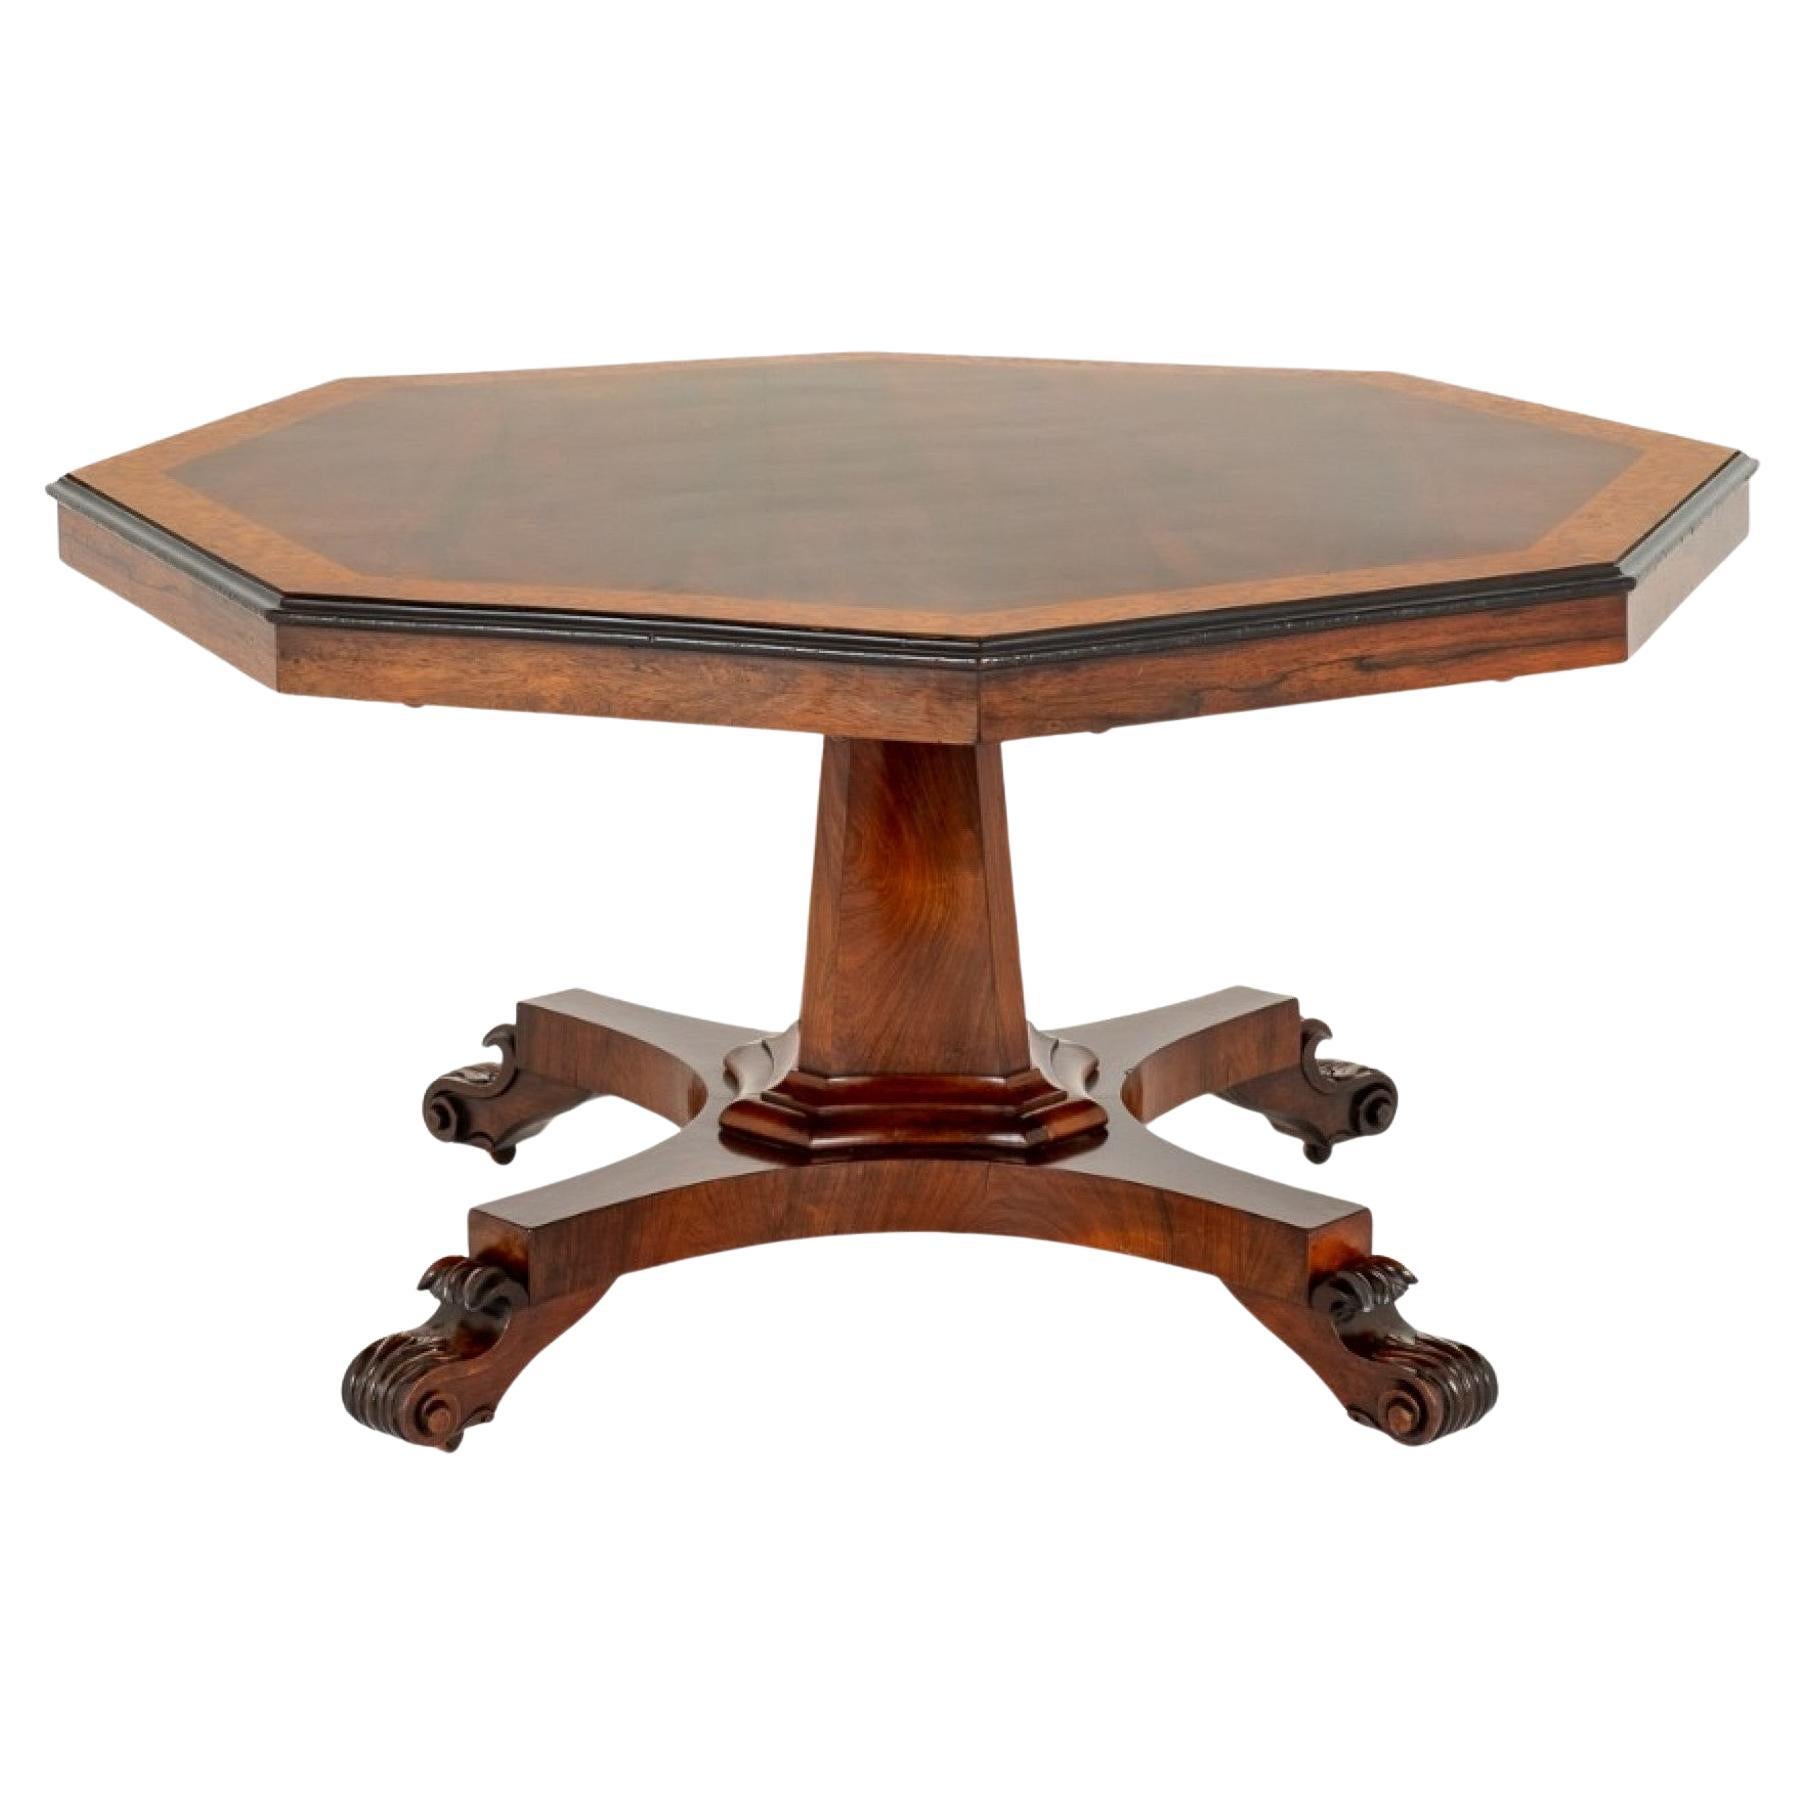 William IV Centre Table Octagaonal Inlay Antique